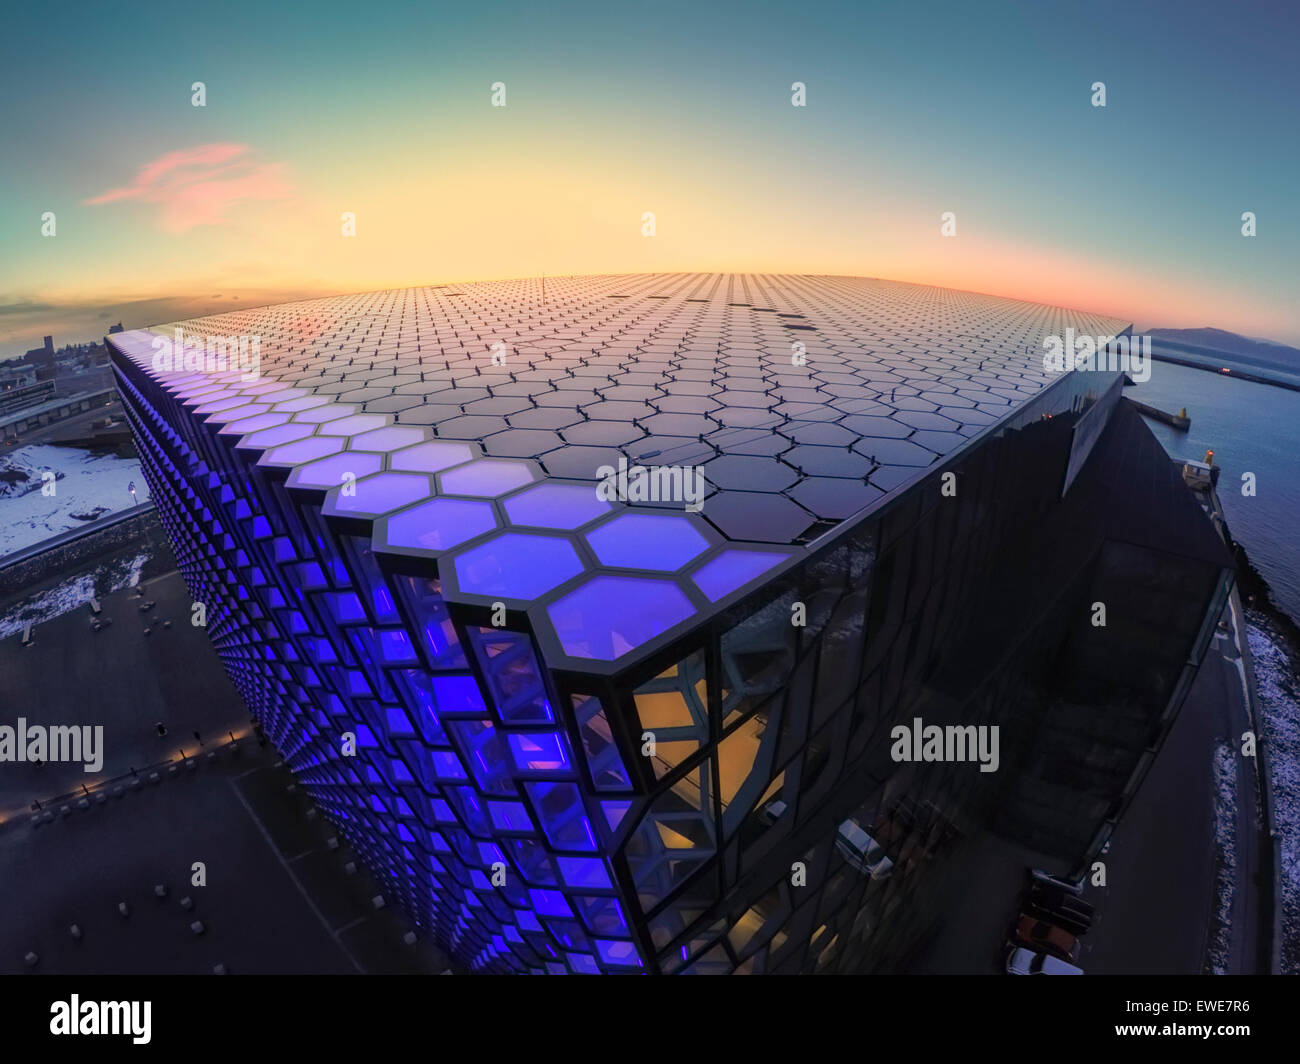 Harpa Concert and Convention Center, Reykjavik, Iceland Image shot with a drone Stock Photo